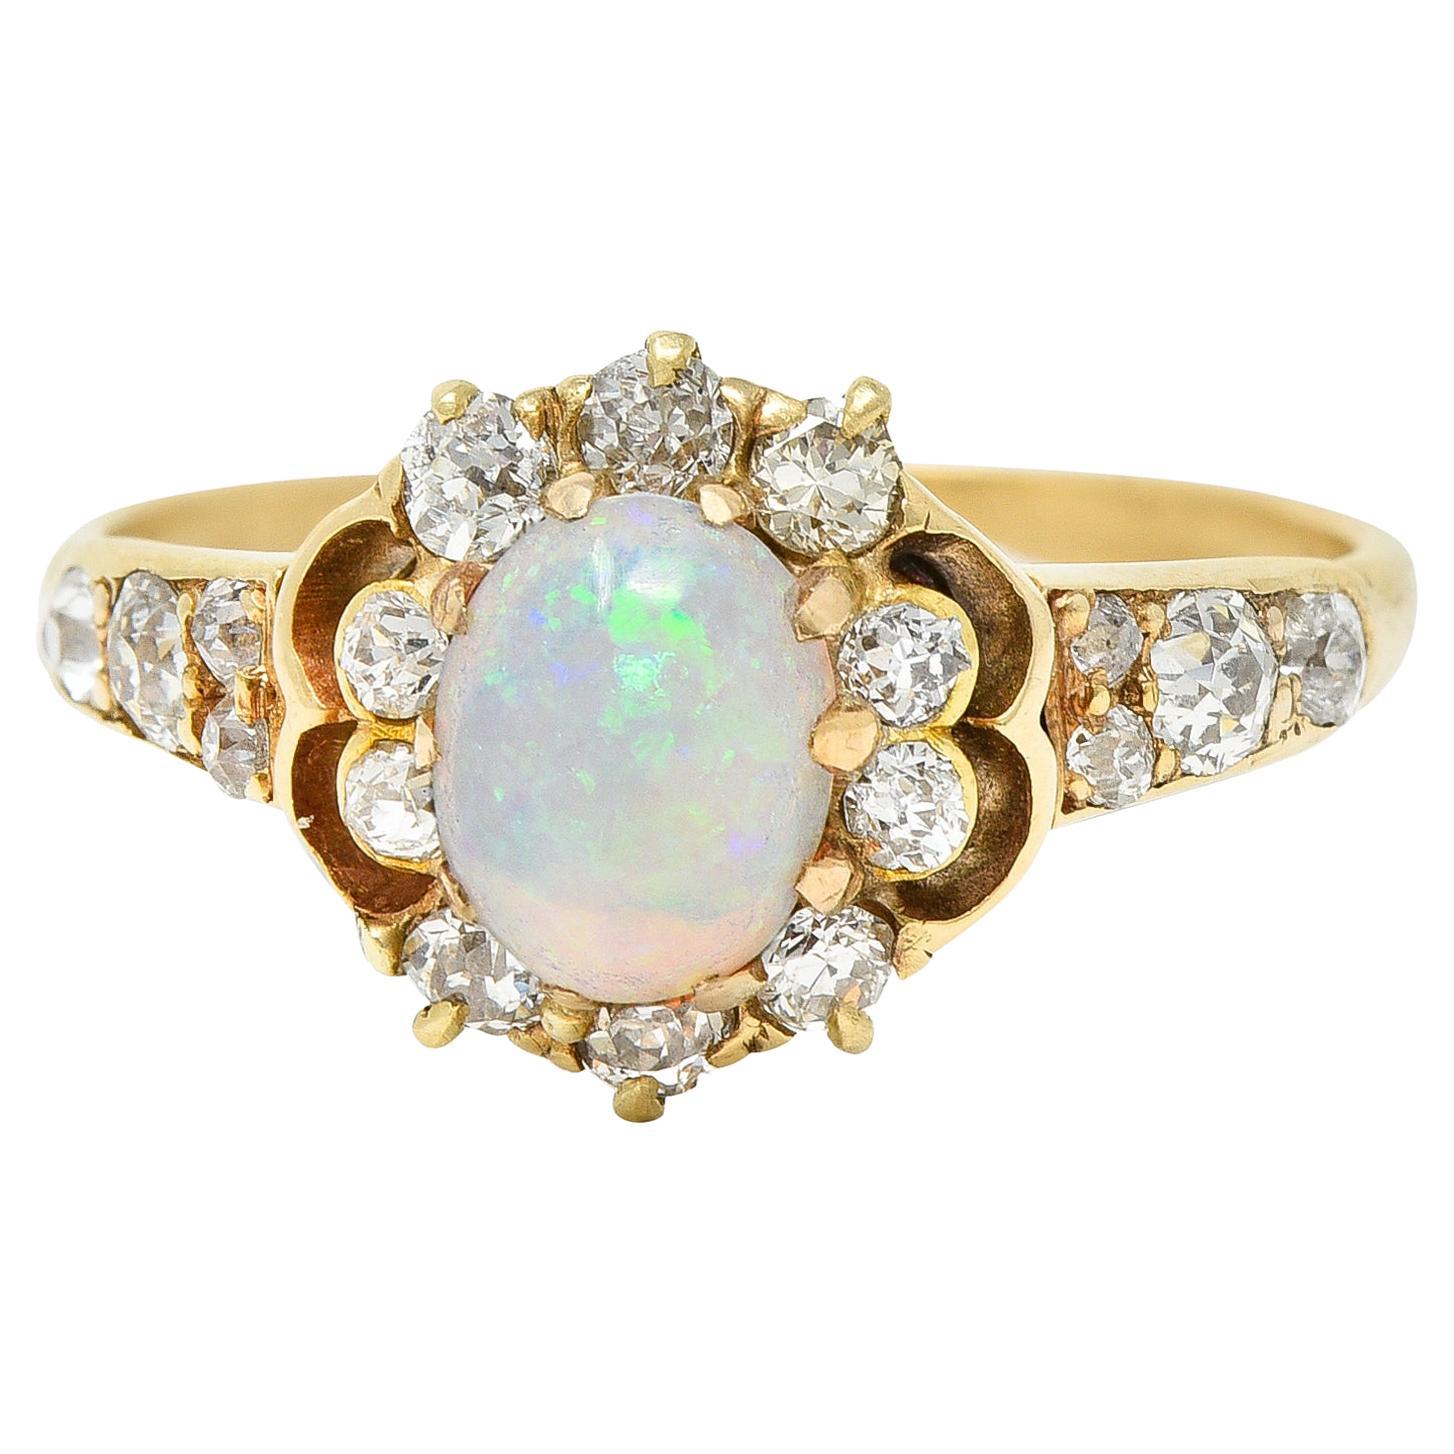 Exquisite Victorian Large Opal Diamond Gold and Sterling Ring at ...